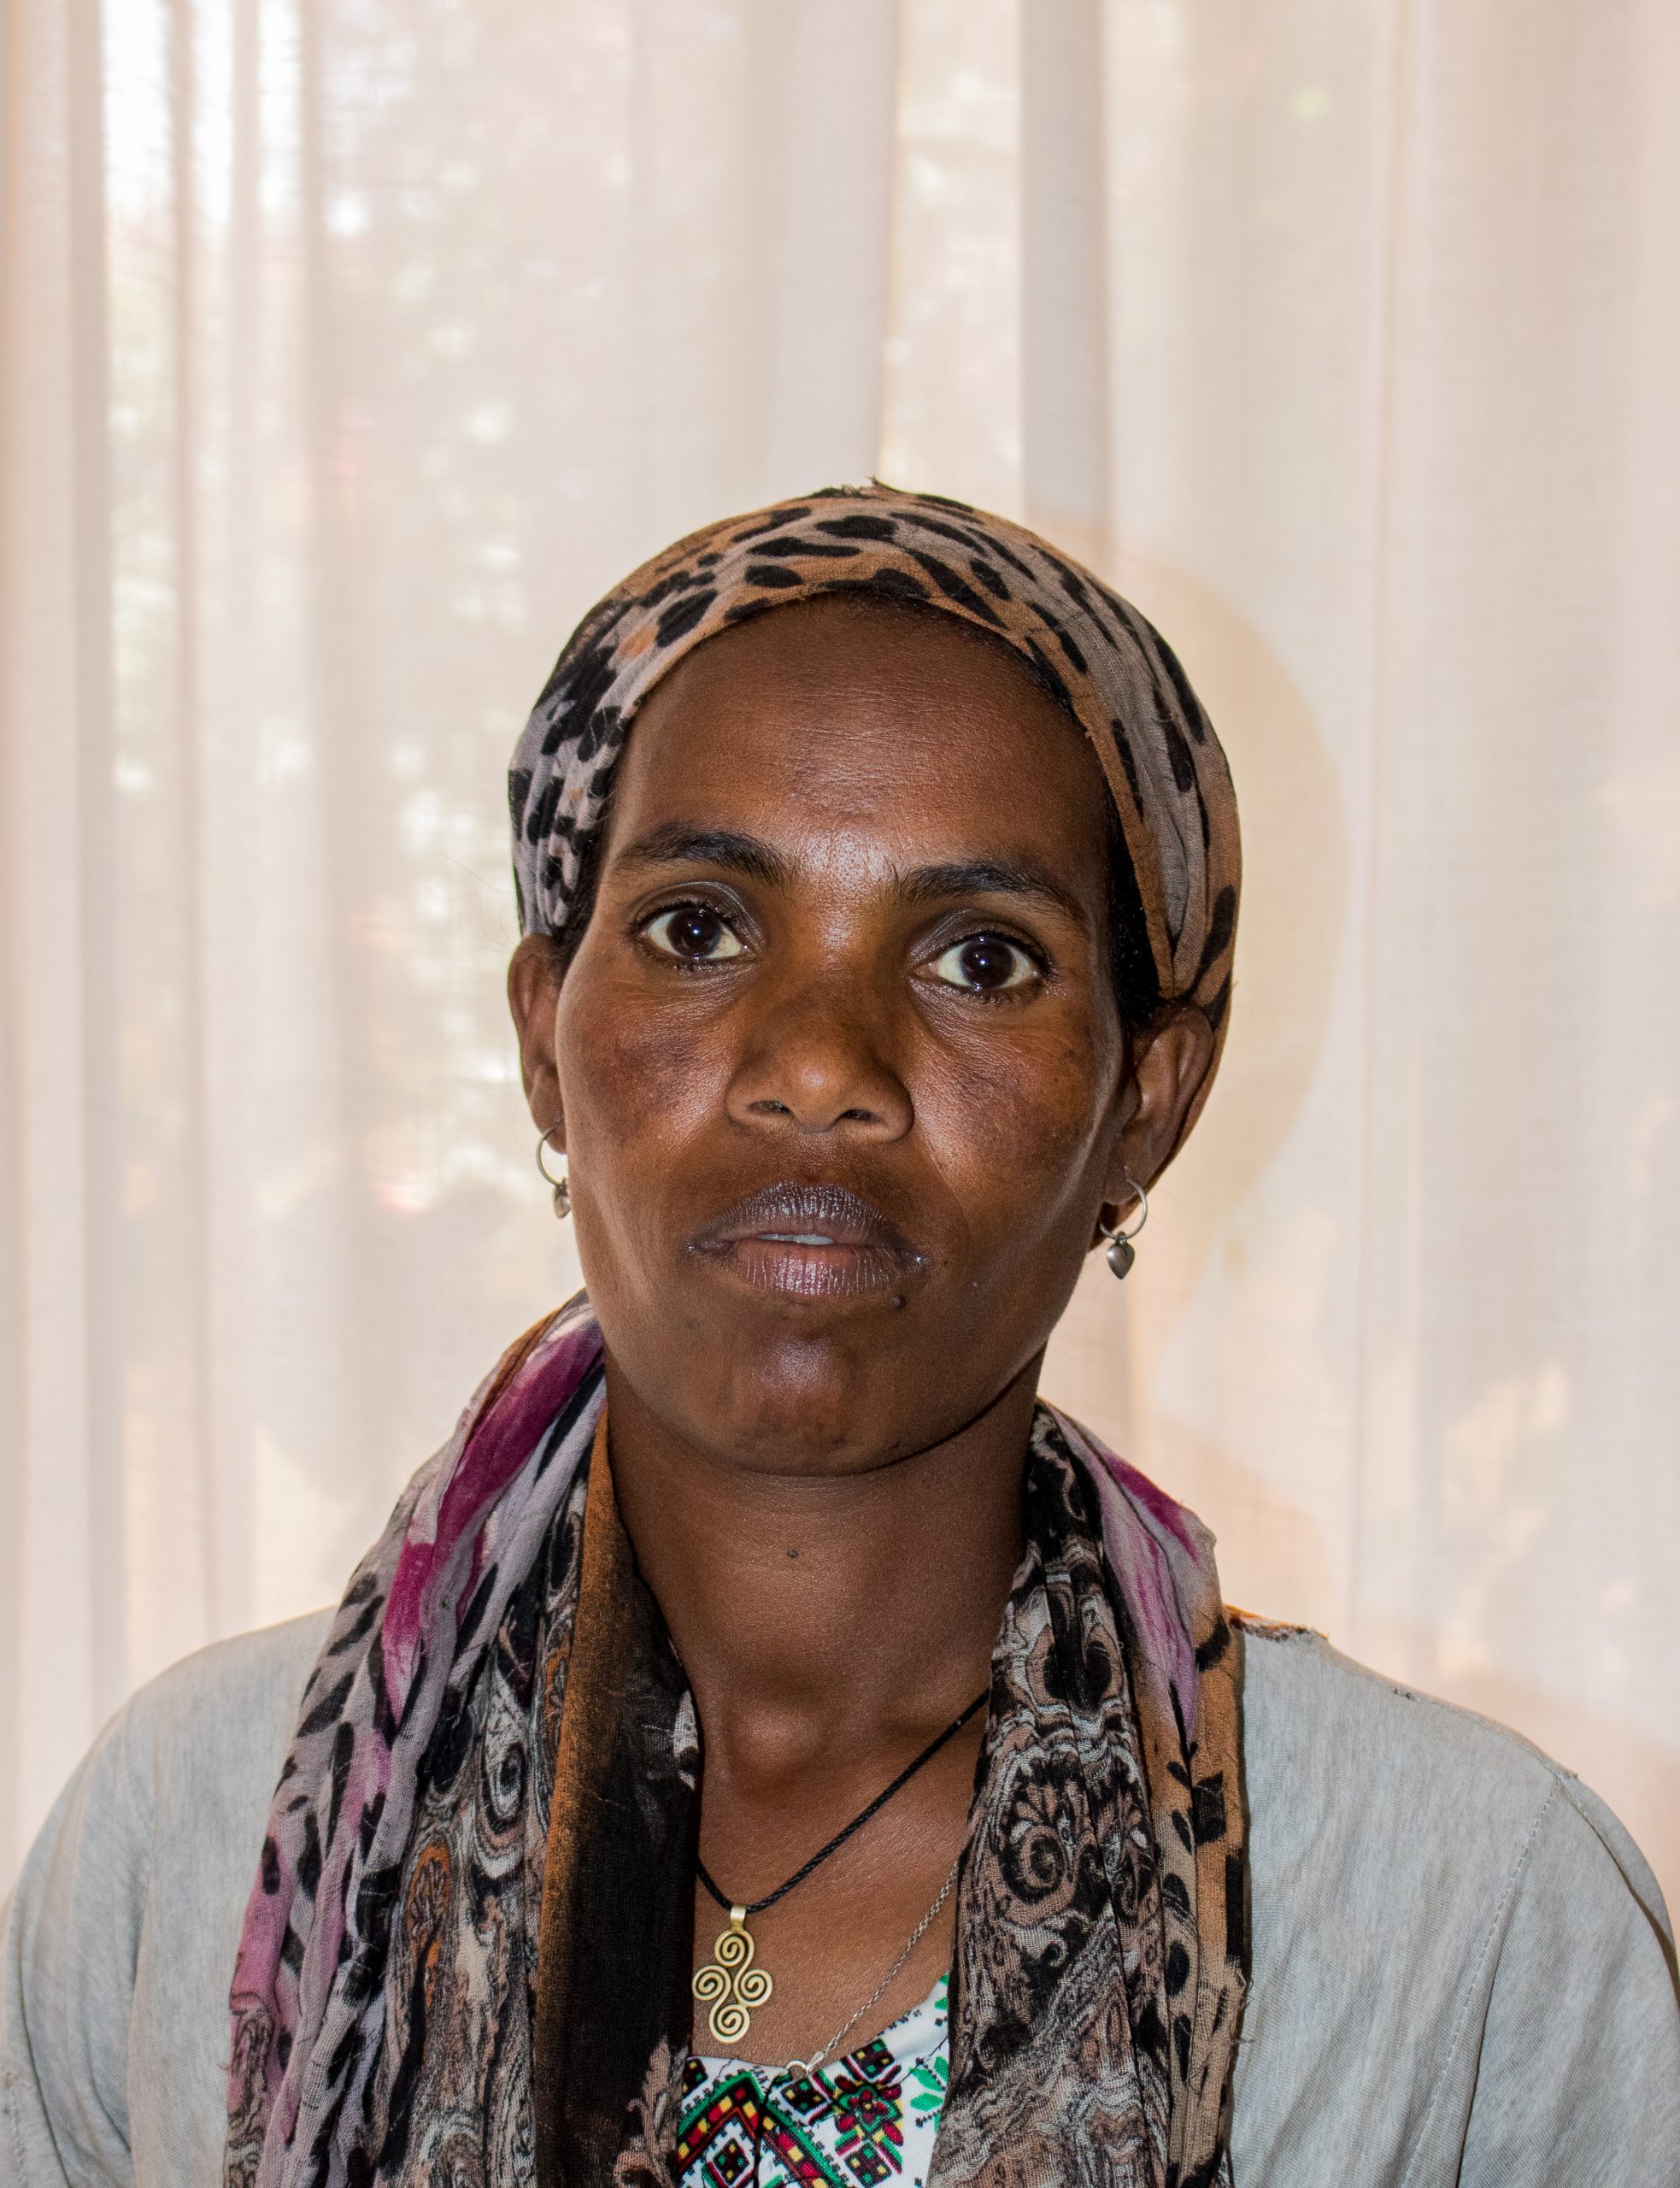 Meet Alemush! She’s so Grateful for the Support from our Monthly Family Empowerment Sponsors!